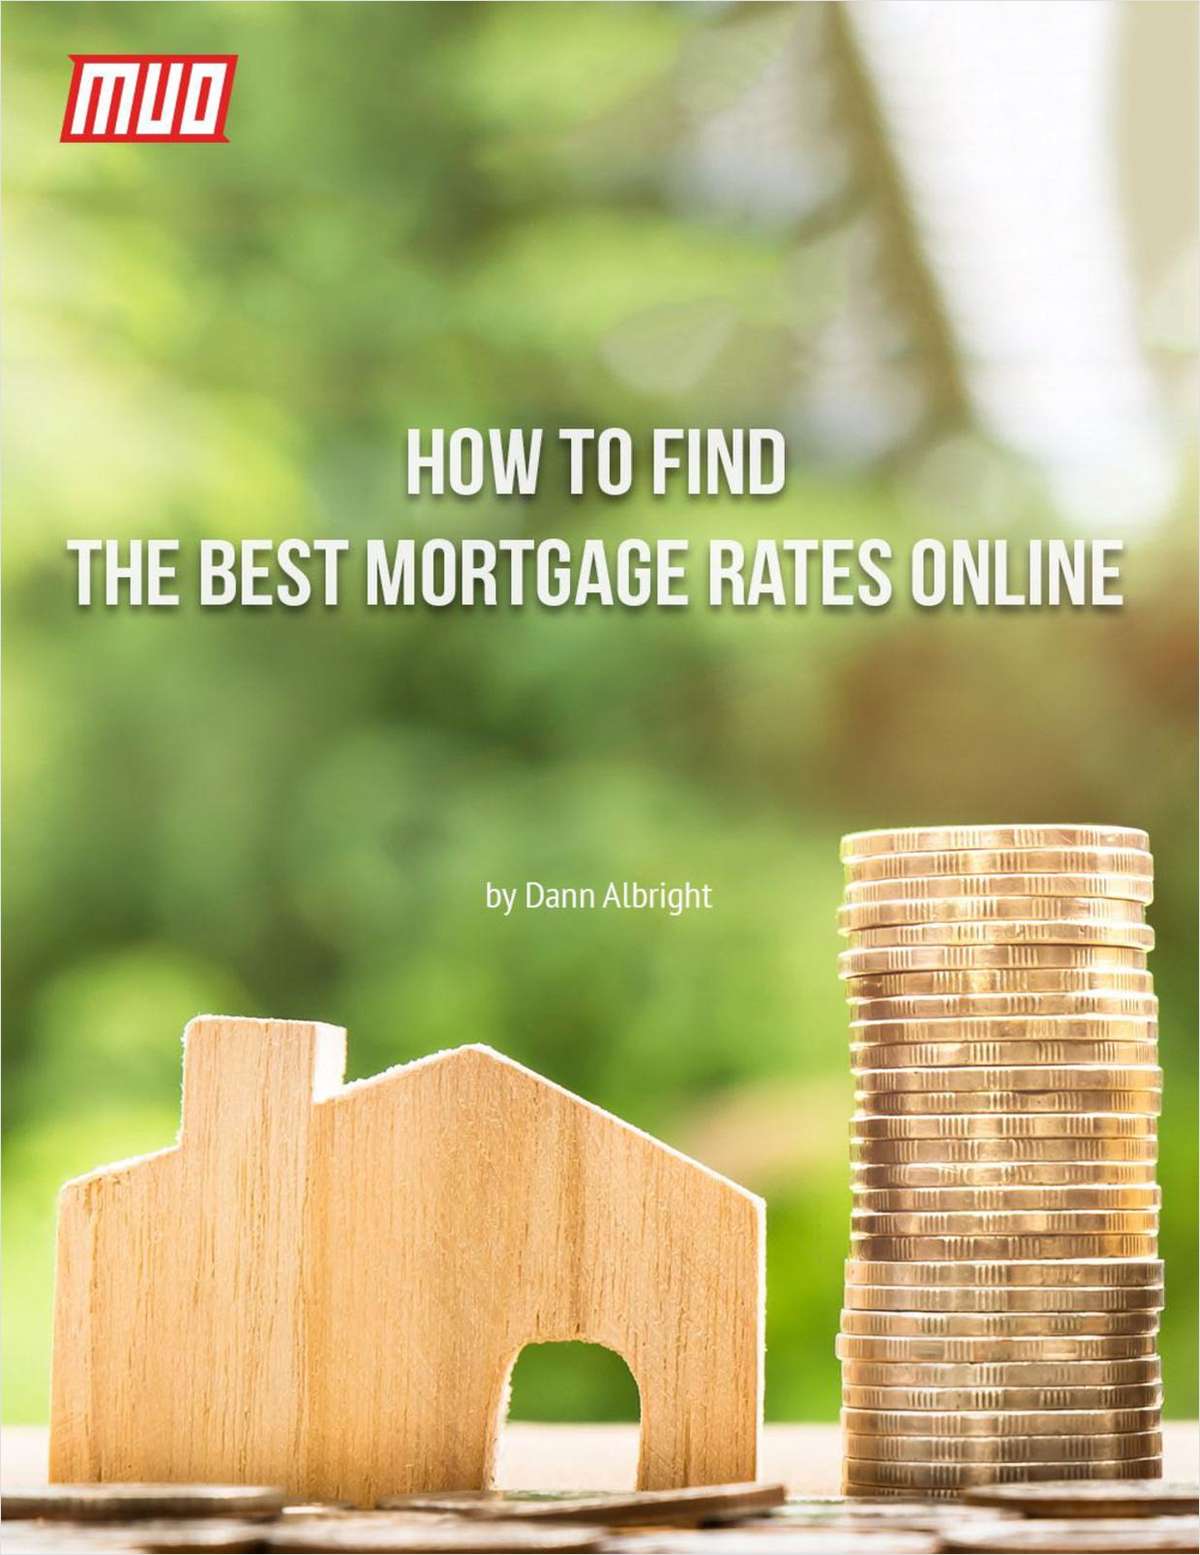 How to Find the Best Mortgage Rates Online